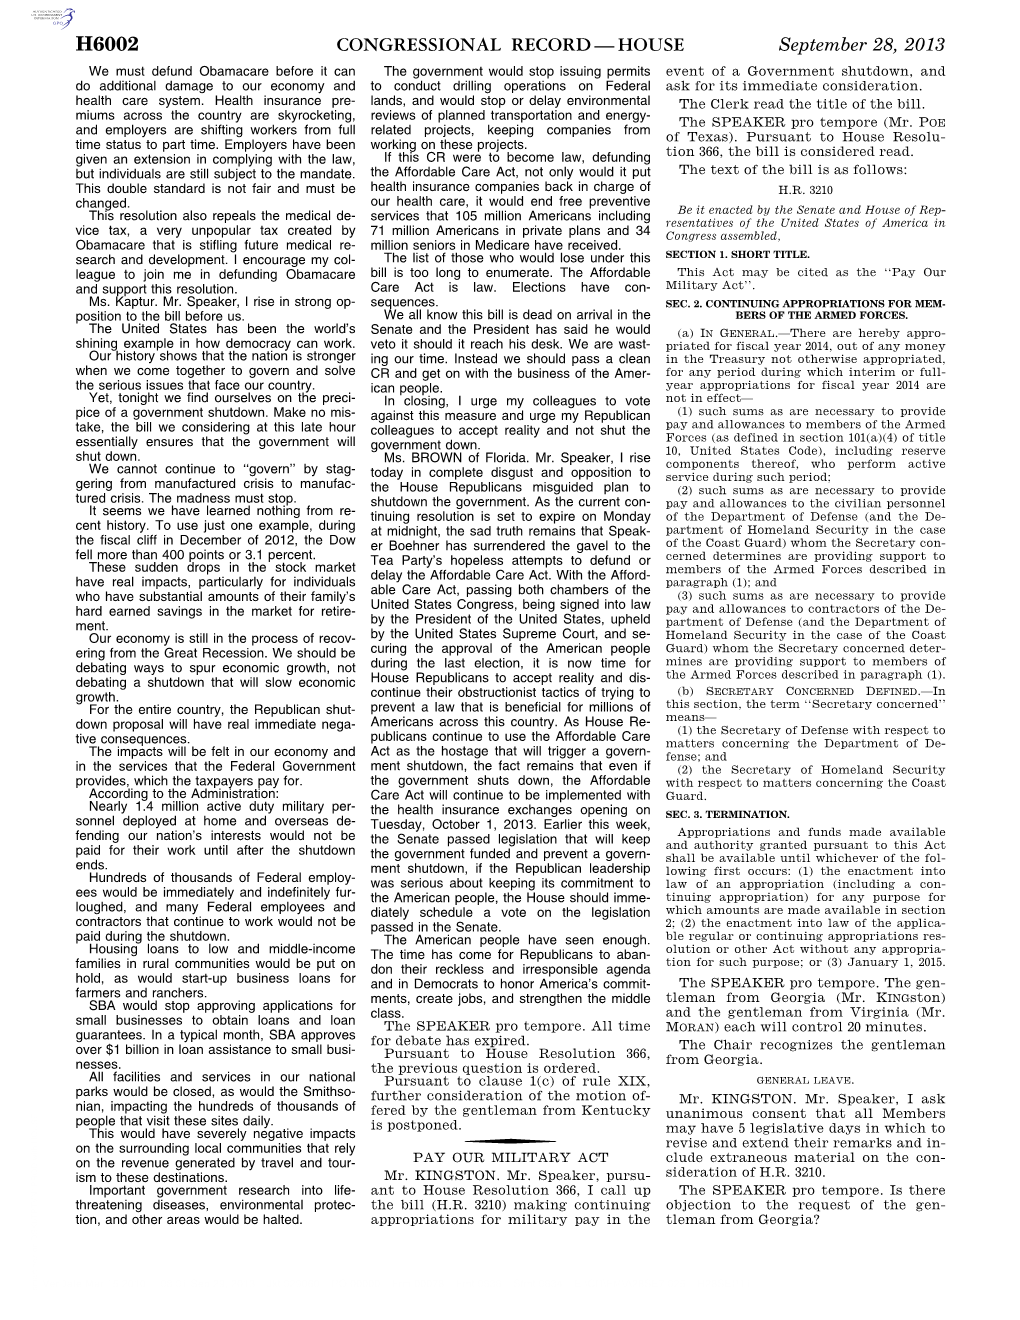 Congressional Record—House H6002